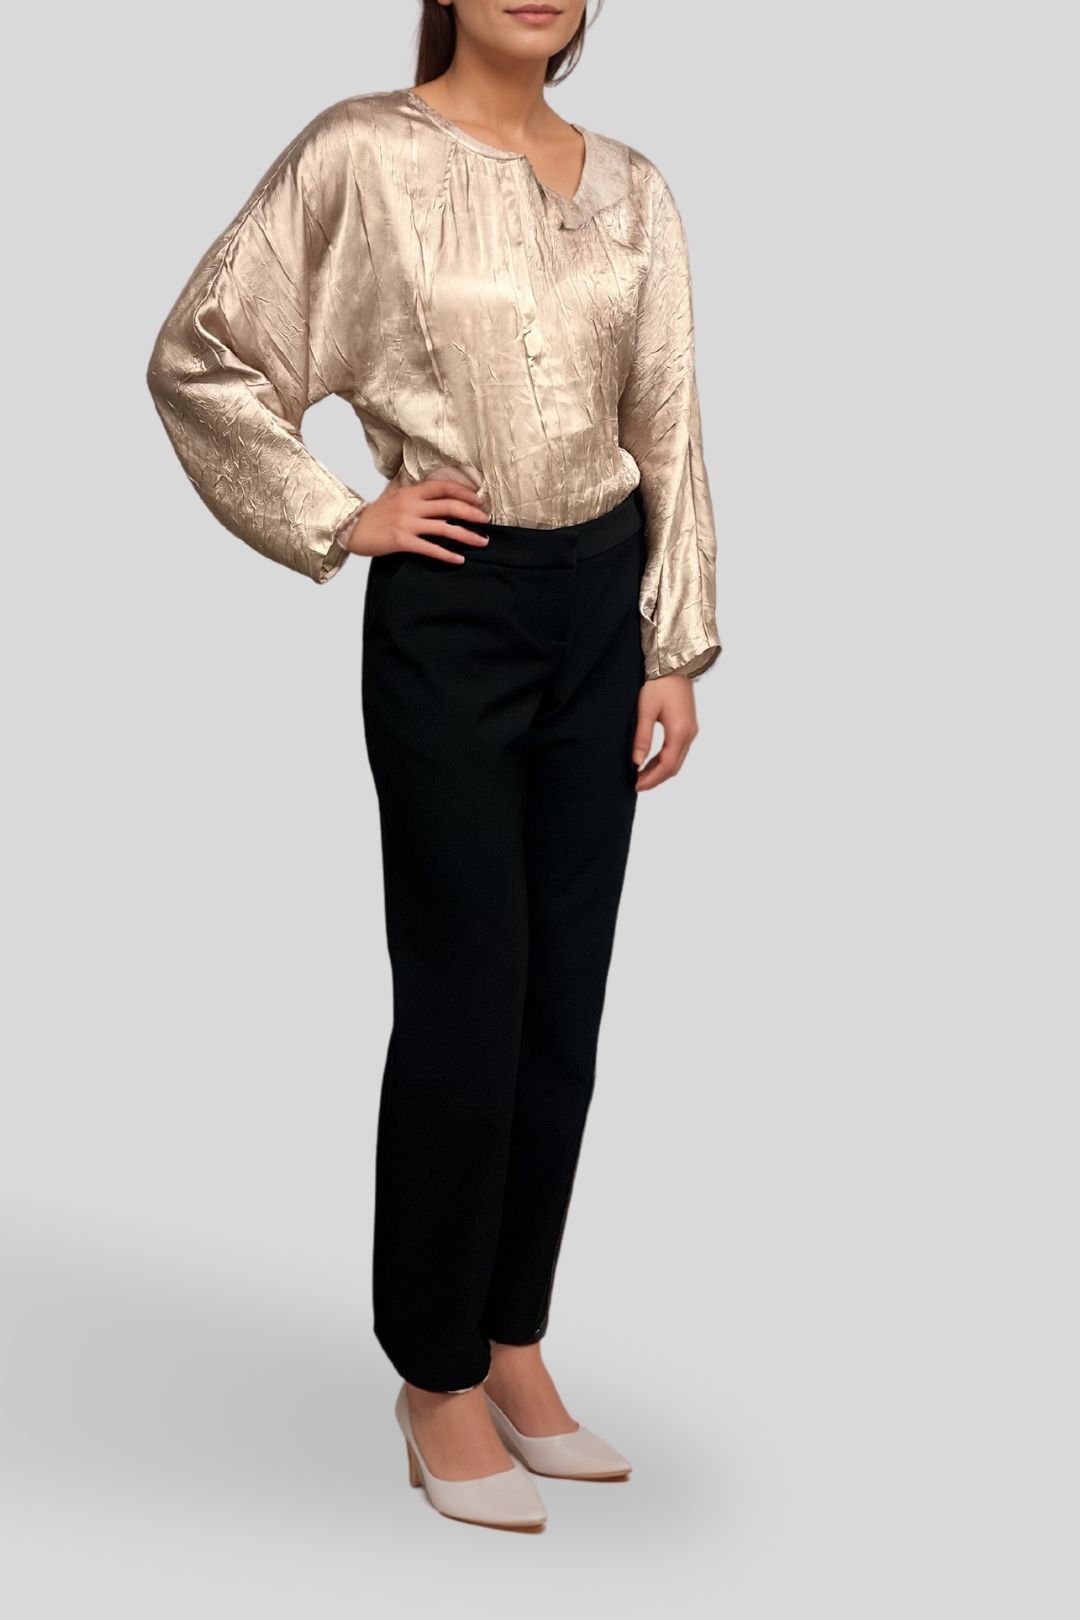 Dress Hire Casual Crushed Satin Batwing Top in Champagne